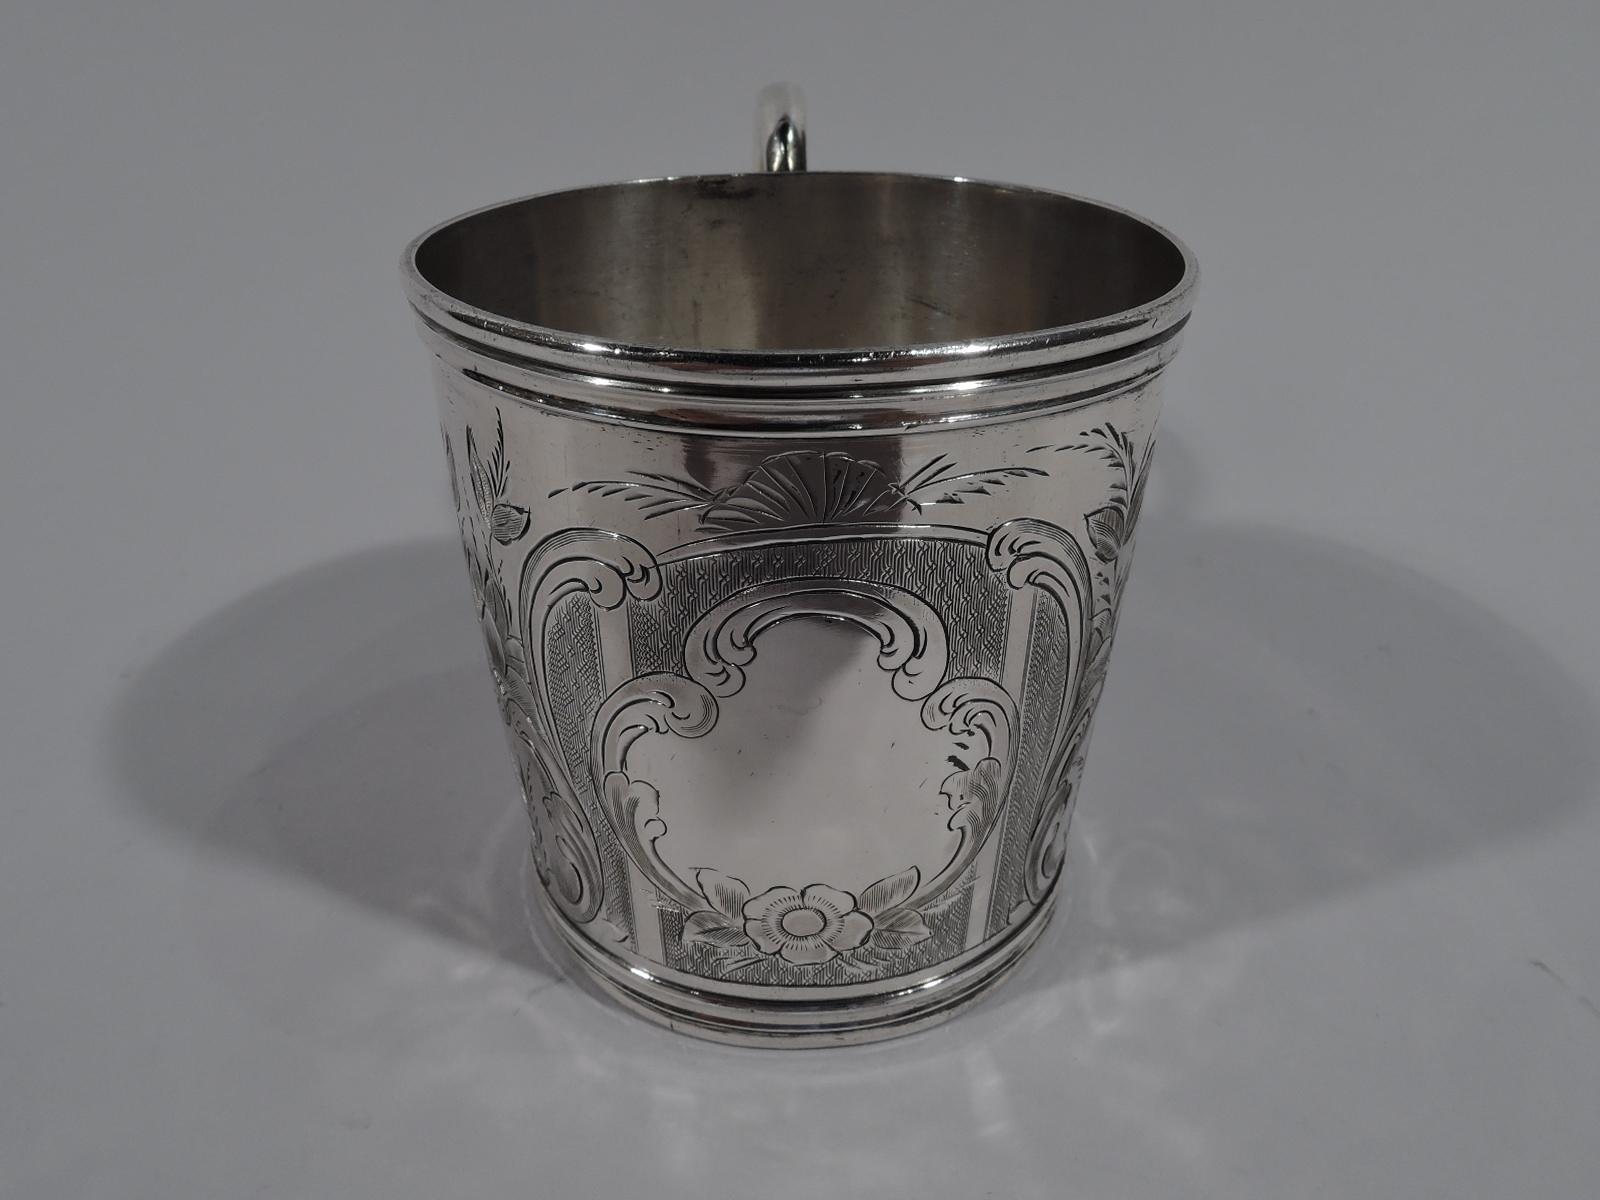 American classical coin silver baby cup, circa 1850. Drum-form with molded rim and base, and S-scroll handle. Engraved scrolled frames with leafy-scrolls and scallop shells, of which 2 filled with engine-turned ornament, and 1 inset with scrolled